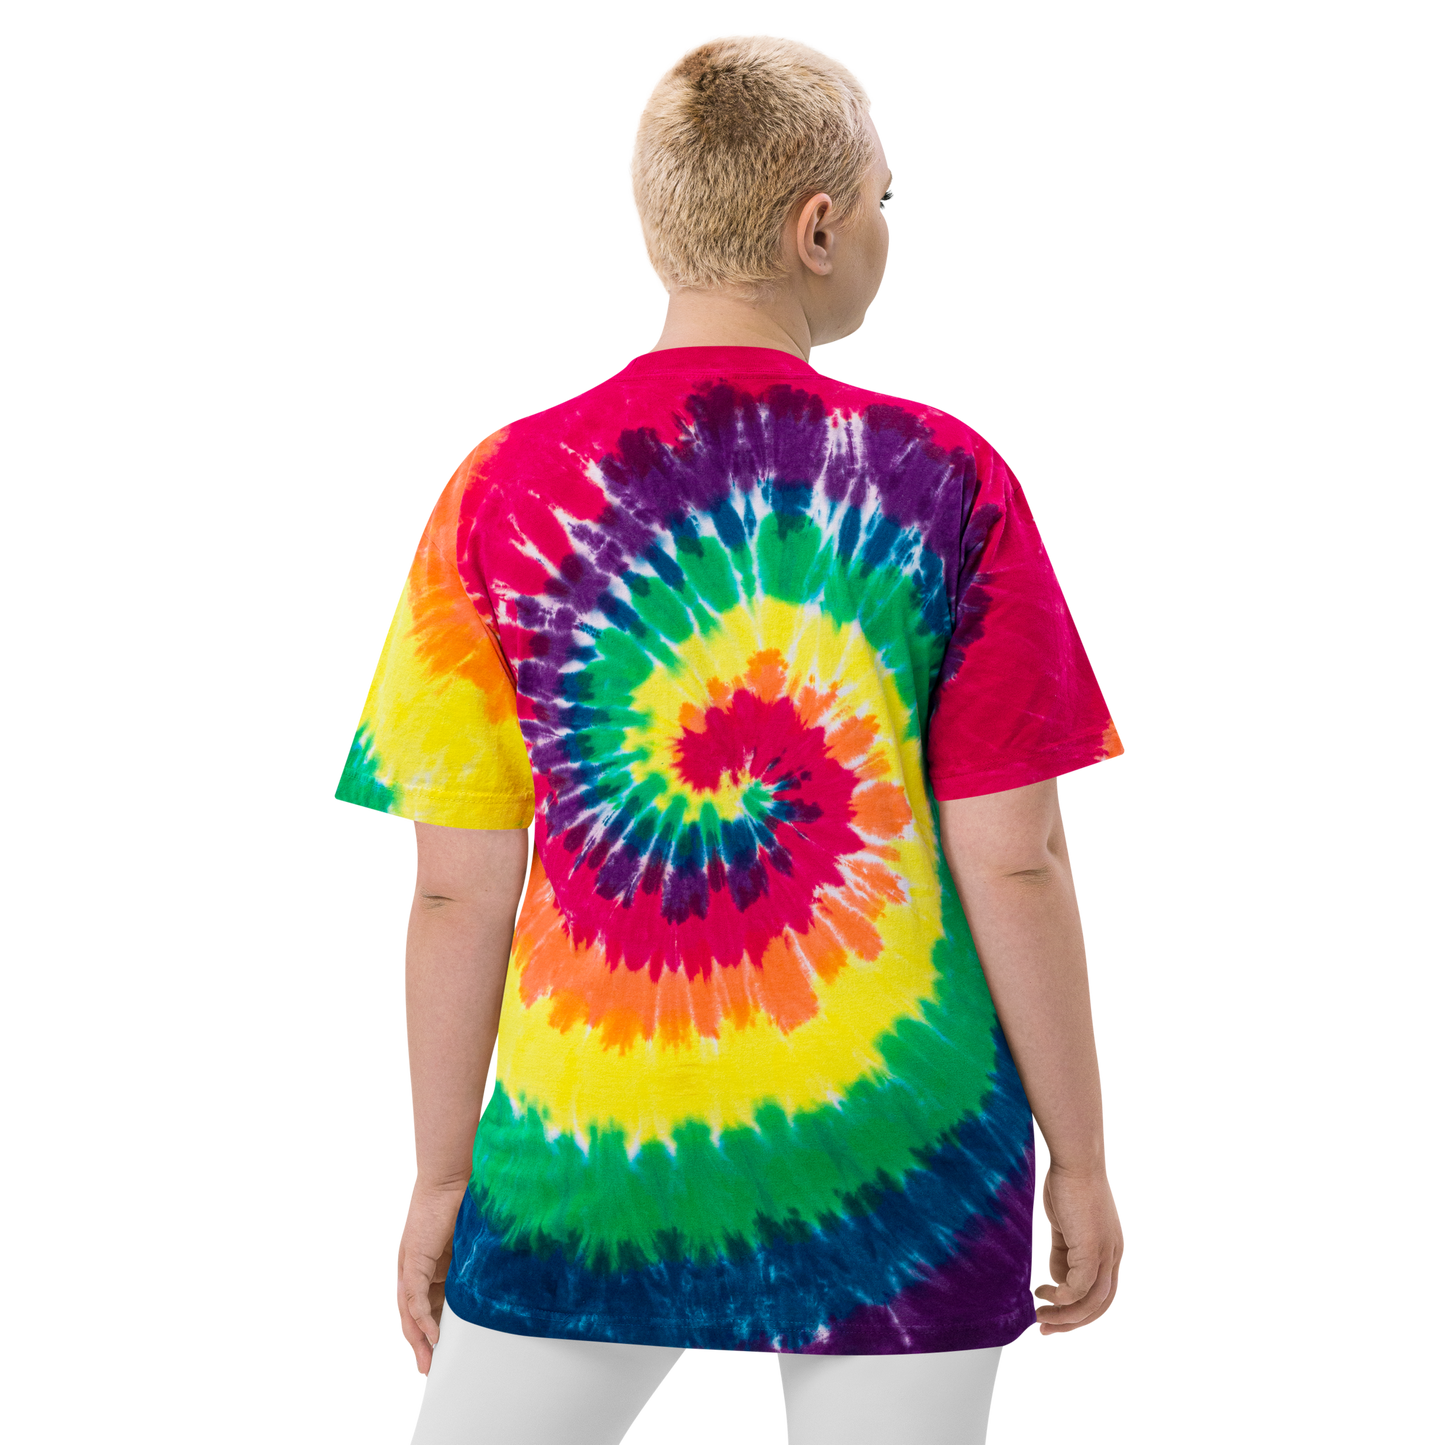 YHM Designs - YXY Whitehorse Oversized Tie-Dye T-Shirt - Crossed-X Design with Airport Code and Vintage Propliner - White Embroidery - Image 14